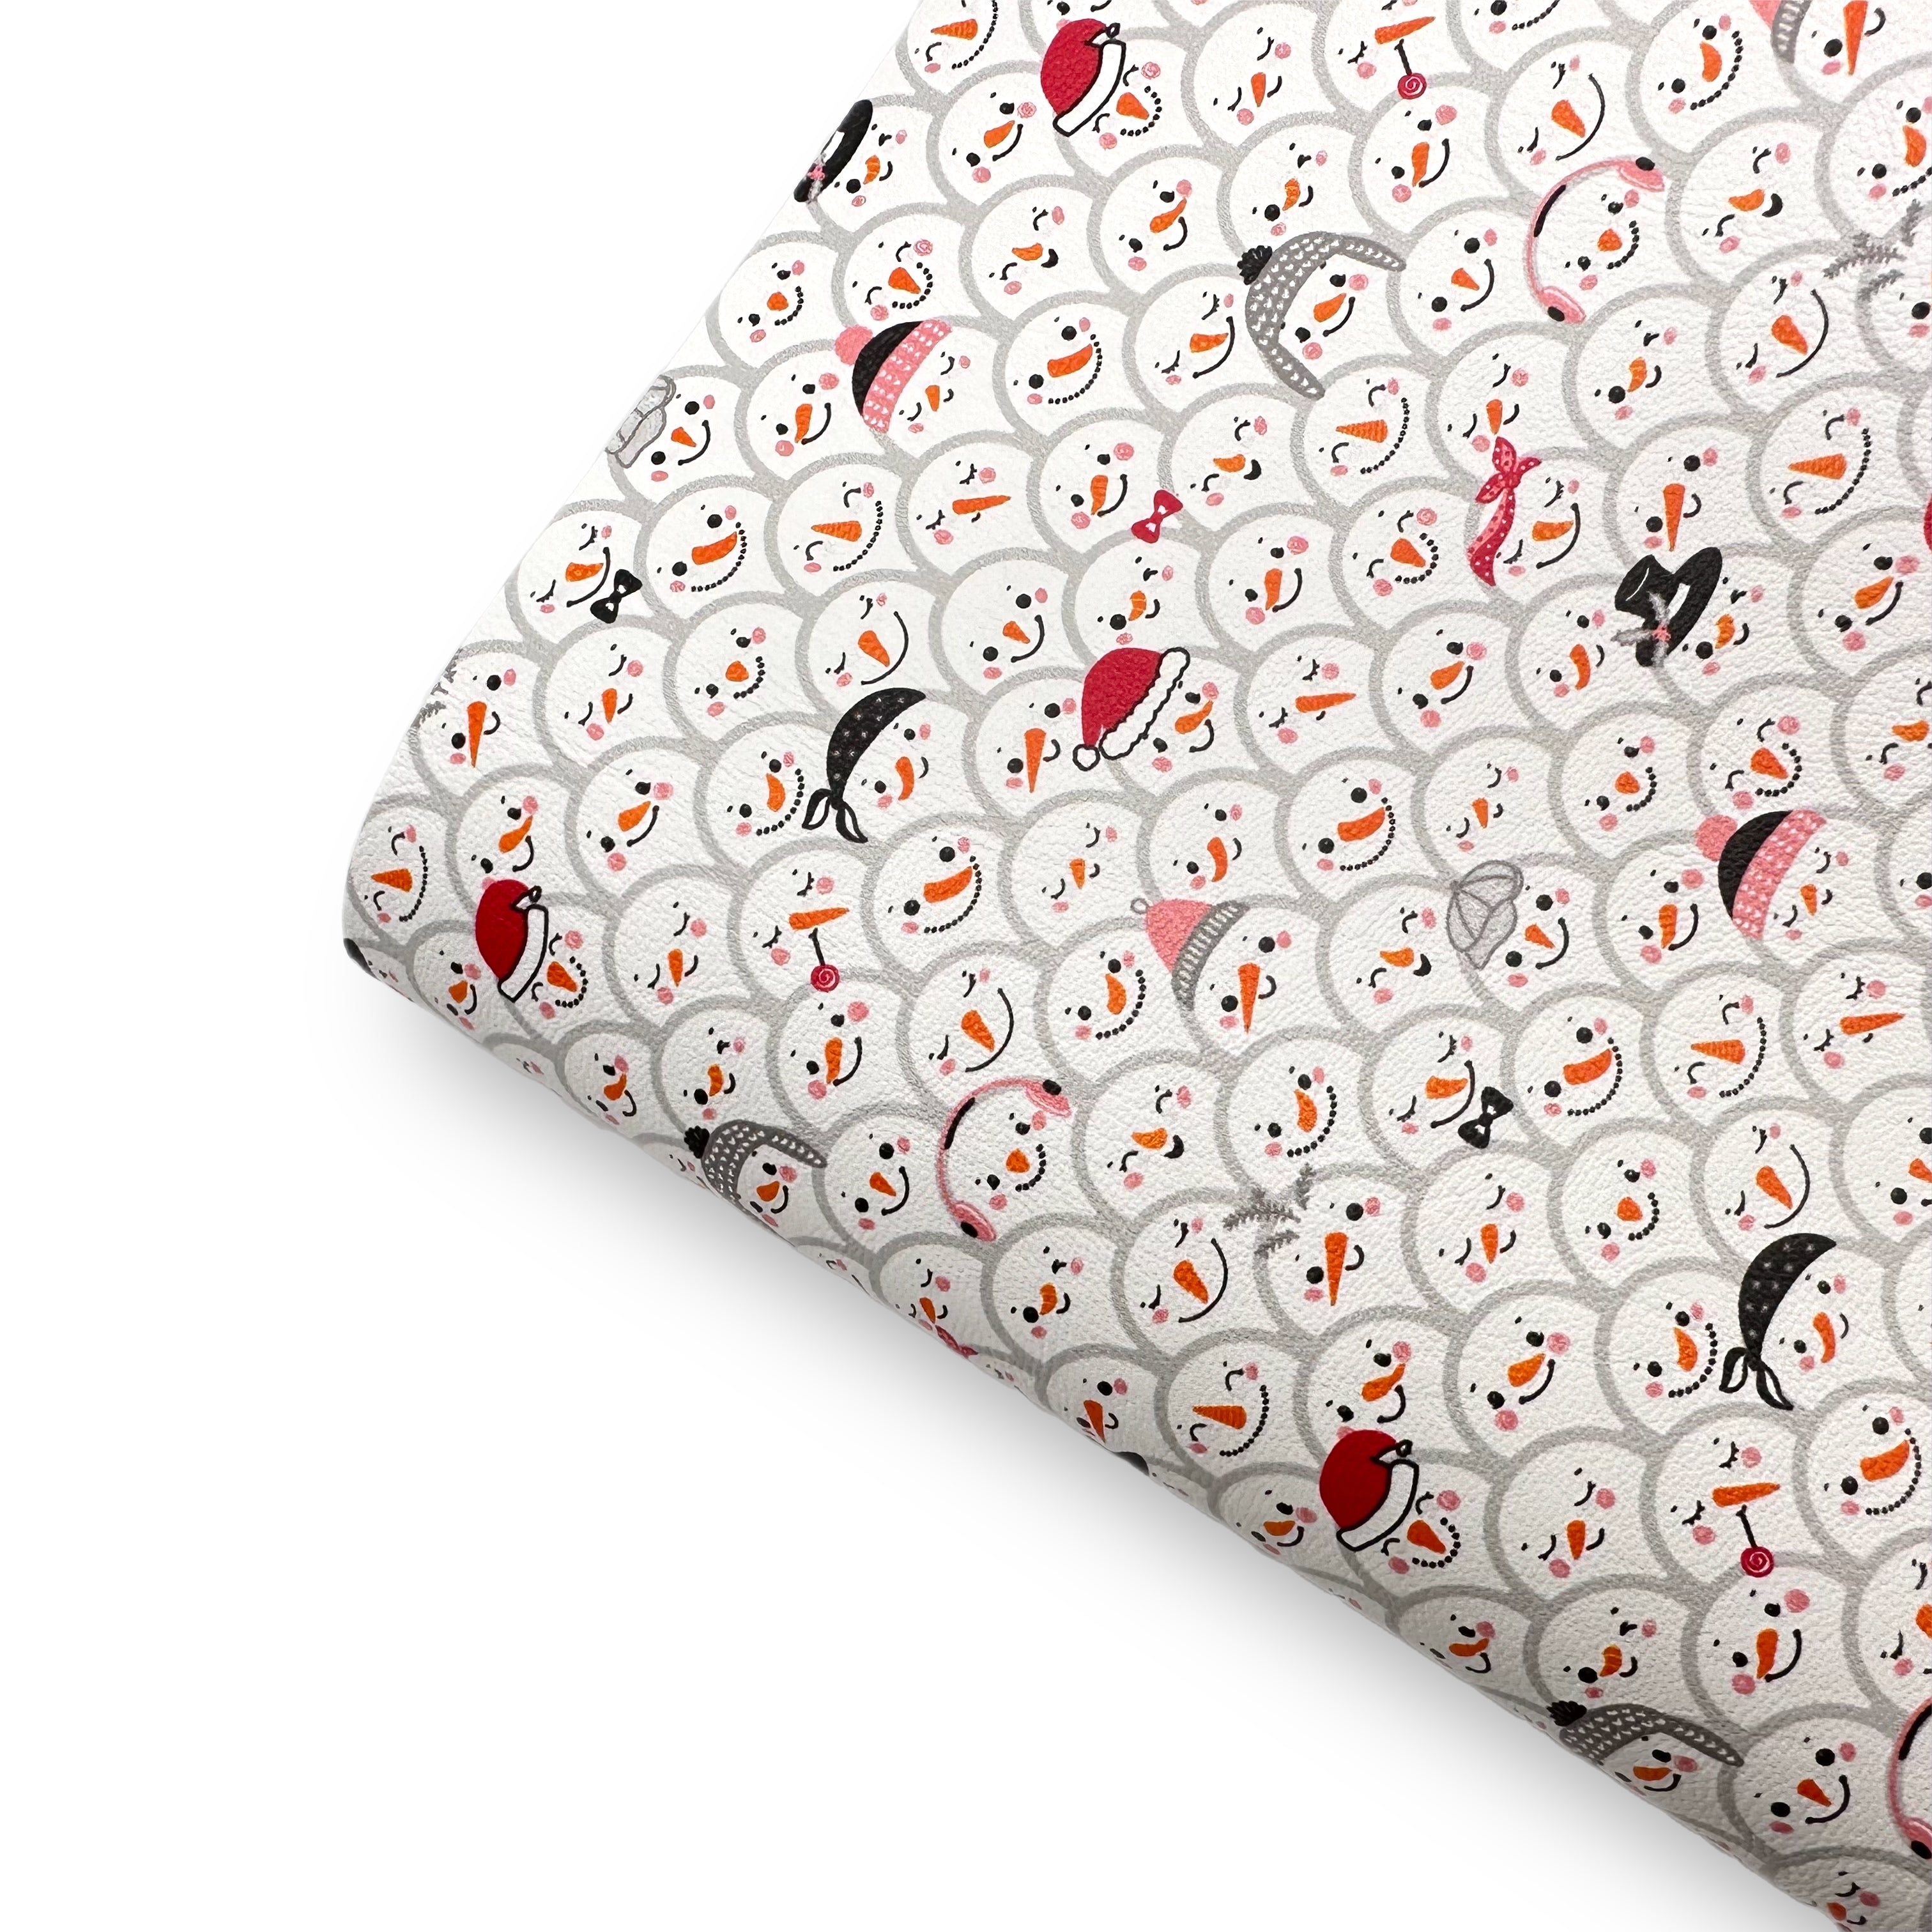 Snow Many Snowmen Premium Faux Leather Fabric Sheets